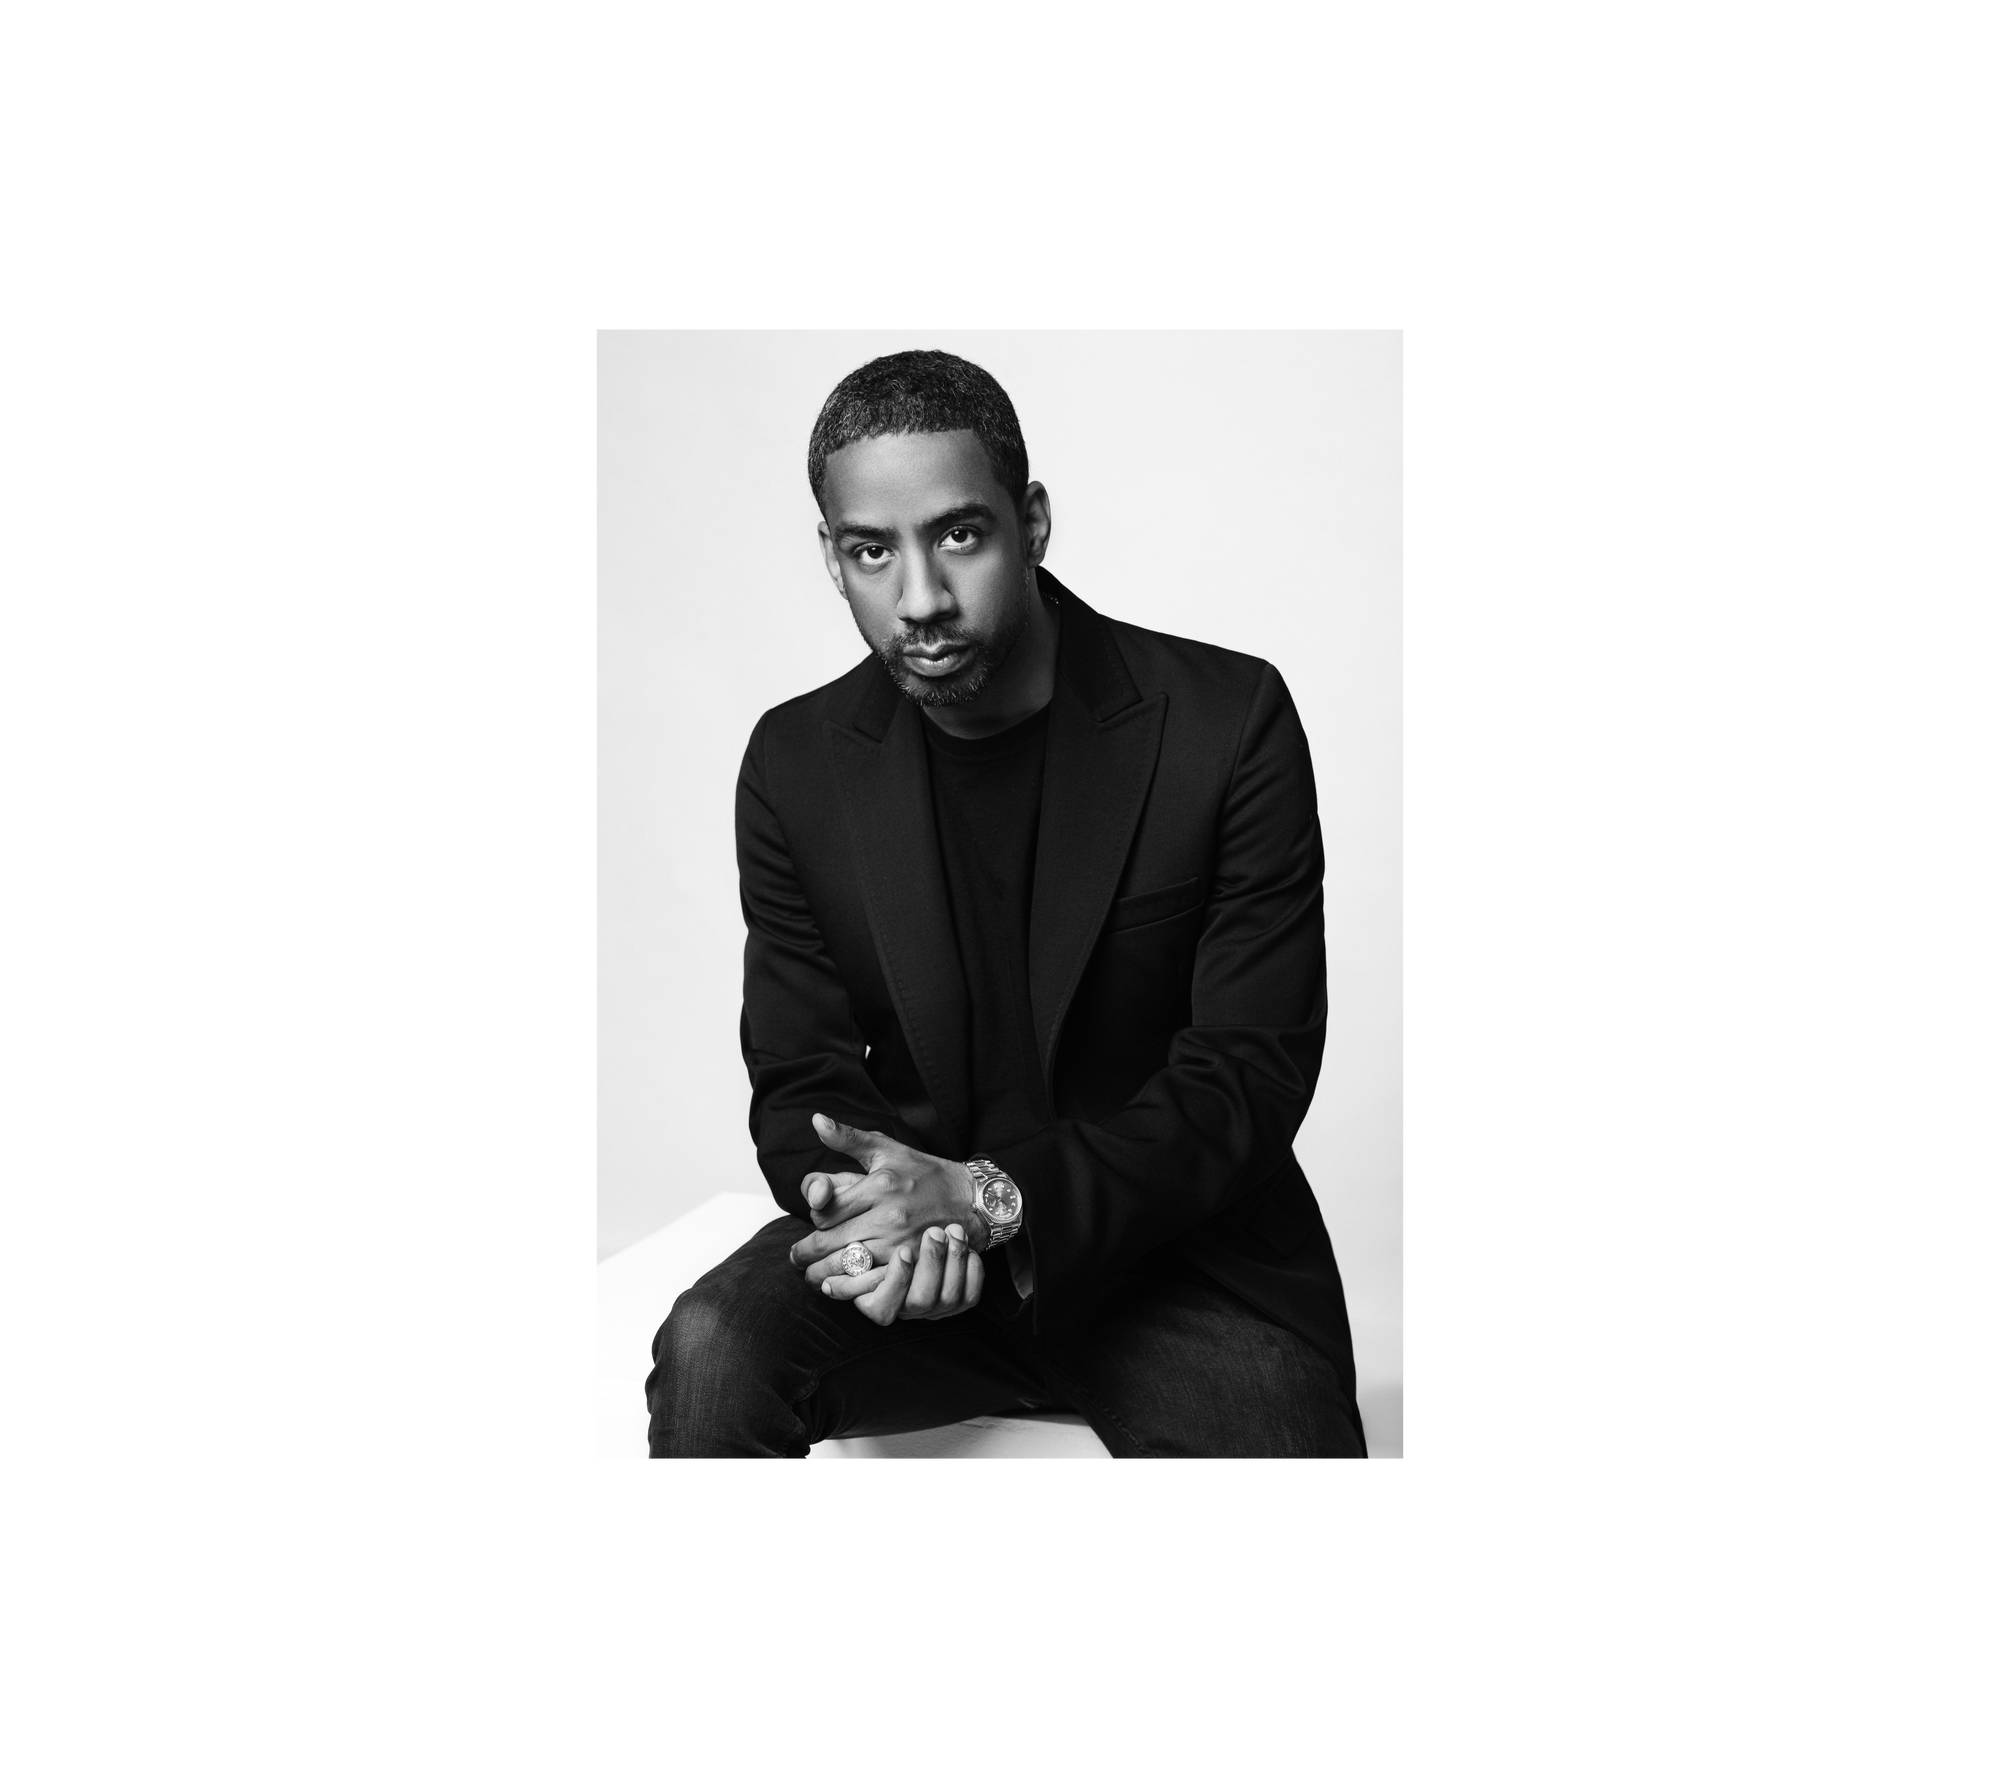 Pathway to Financial Freedom - WealthPlan™ by Ryan Leslie